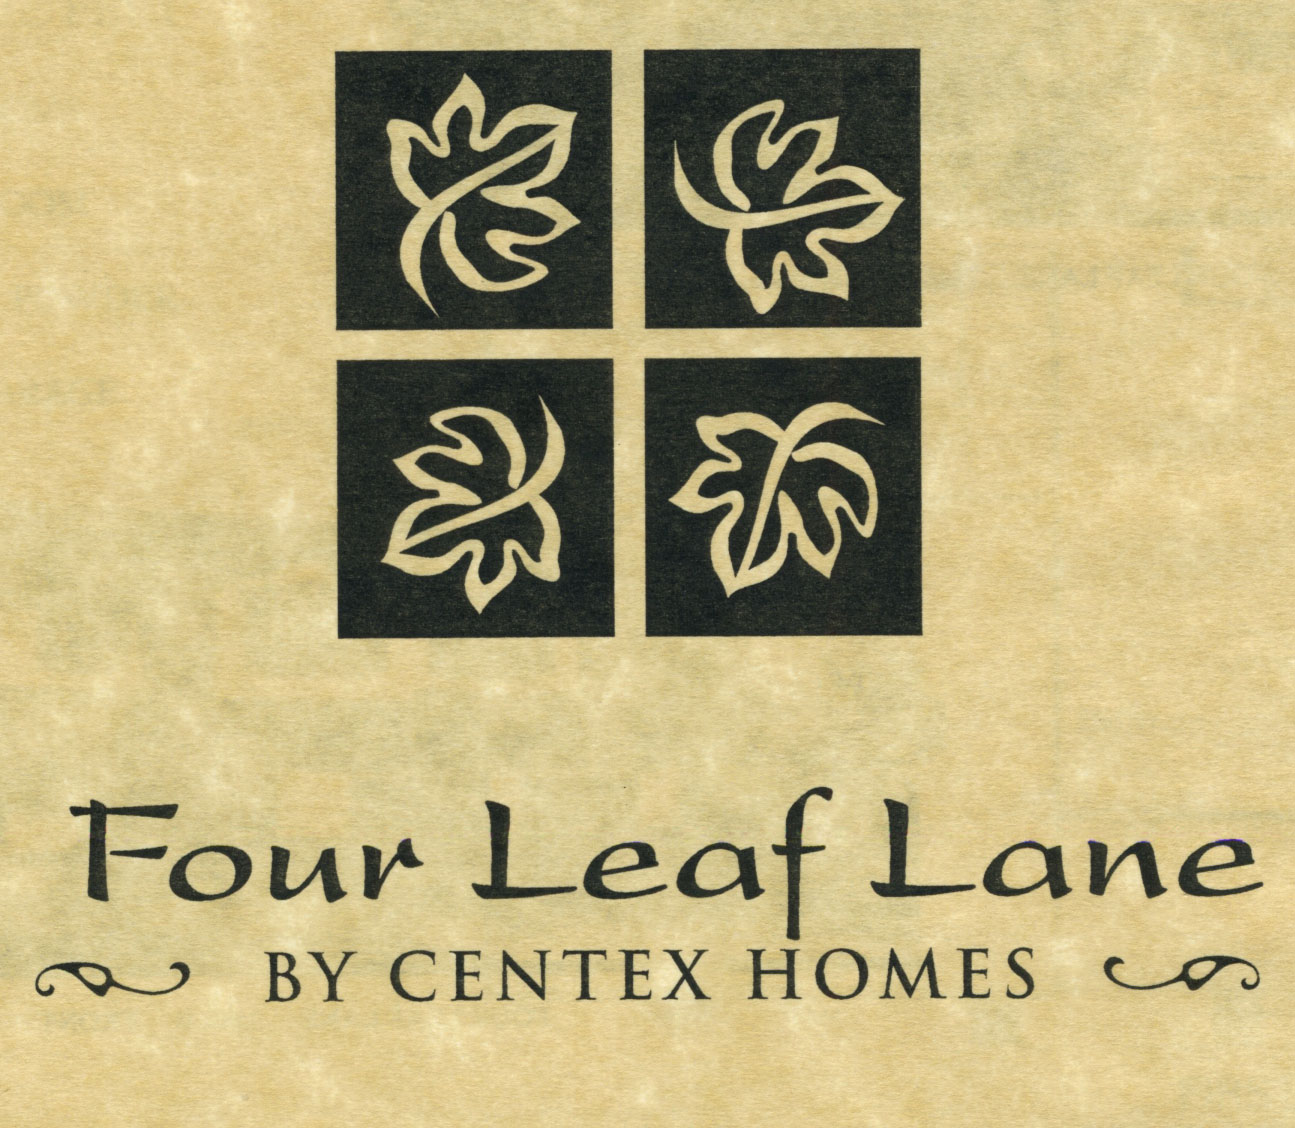 Four Leaf Lane Homes In Eastvale By Centex Homes Life In The 92880